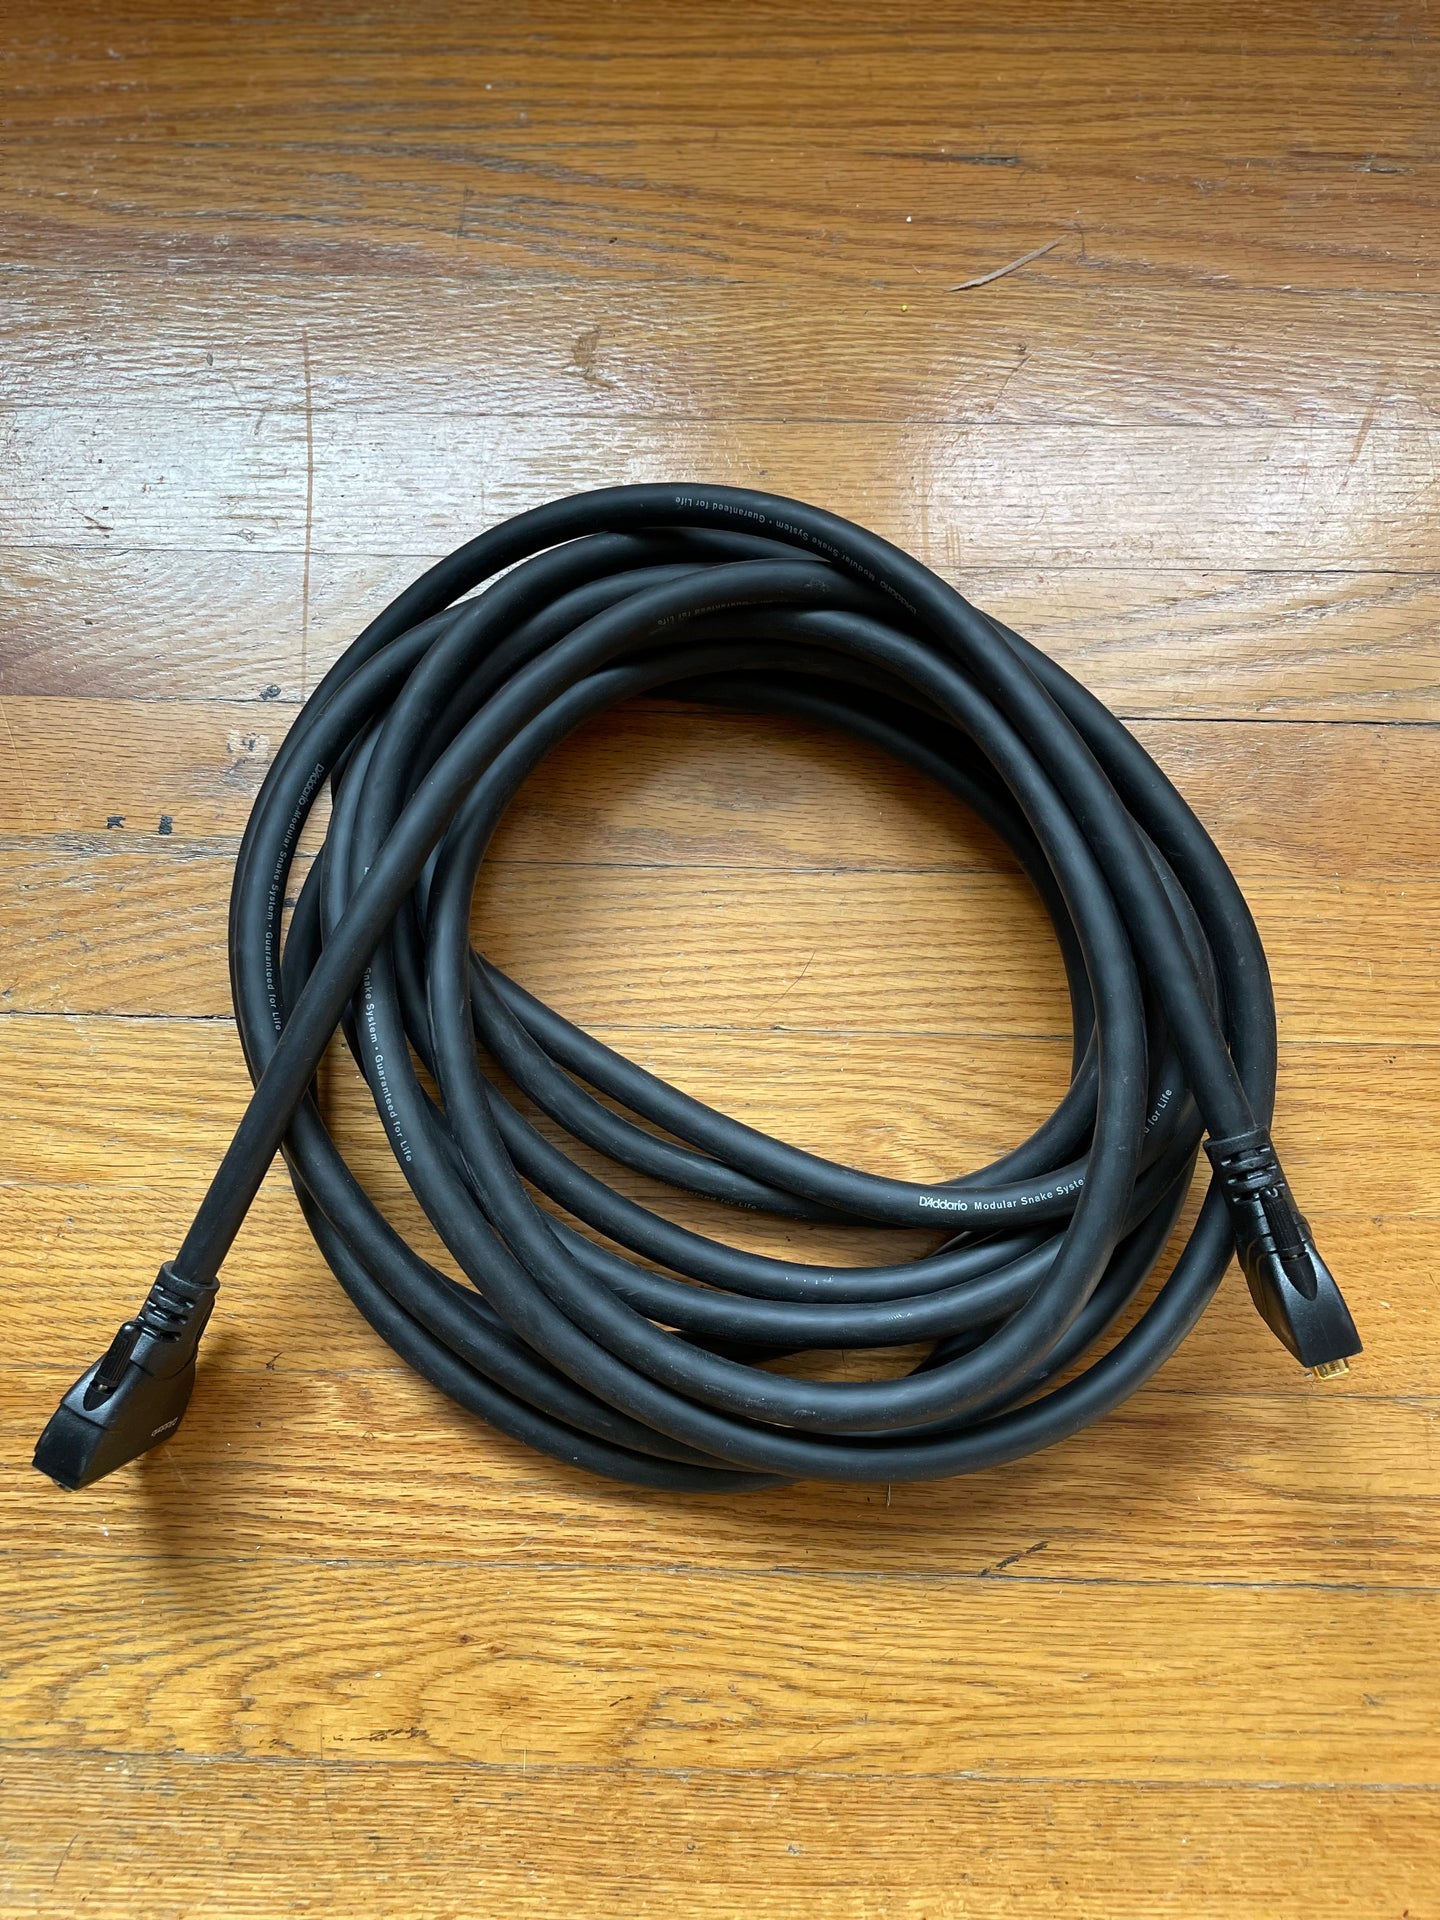 D’Addario Modular Snake System 25ft DB25 Core Cable